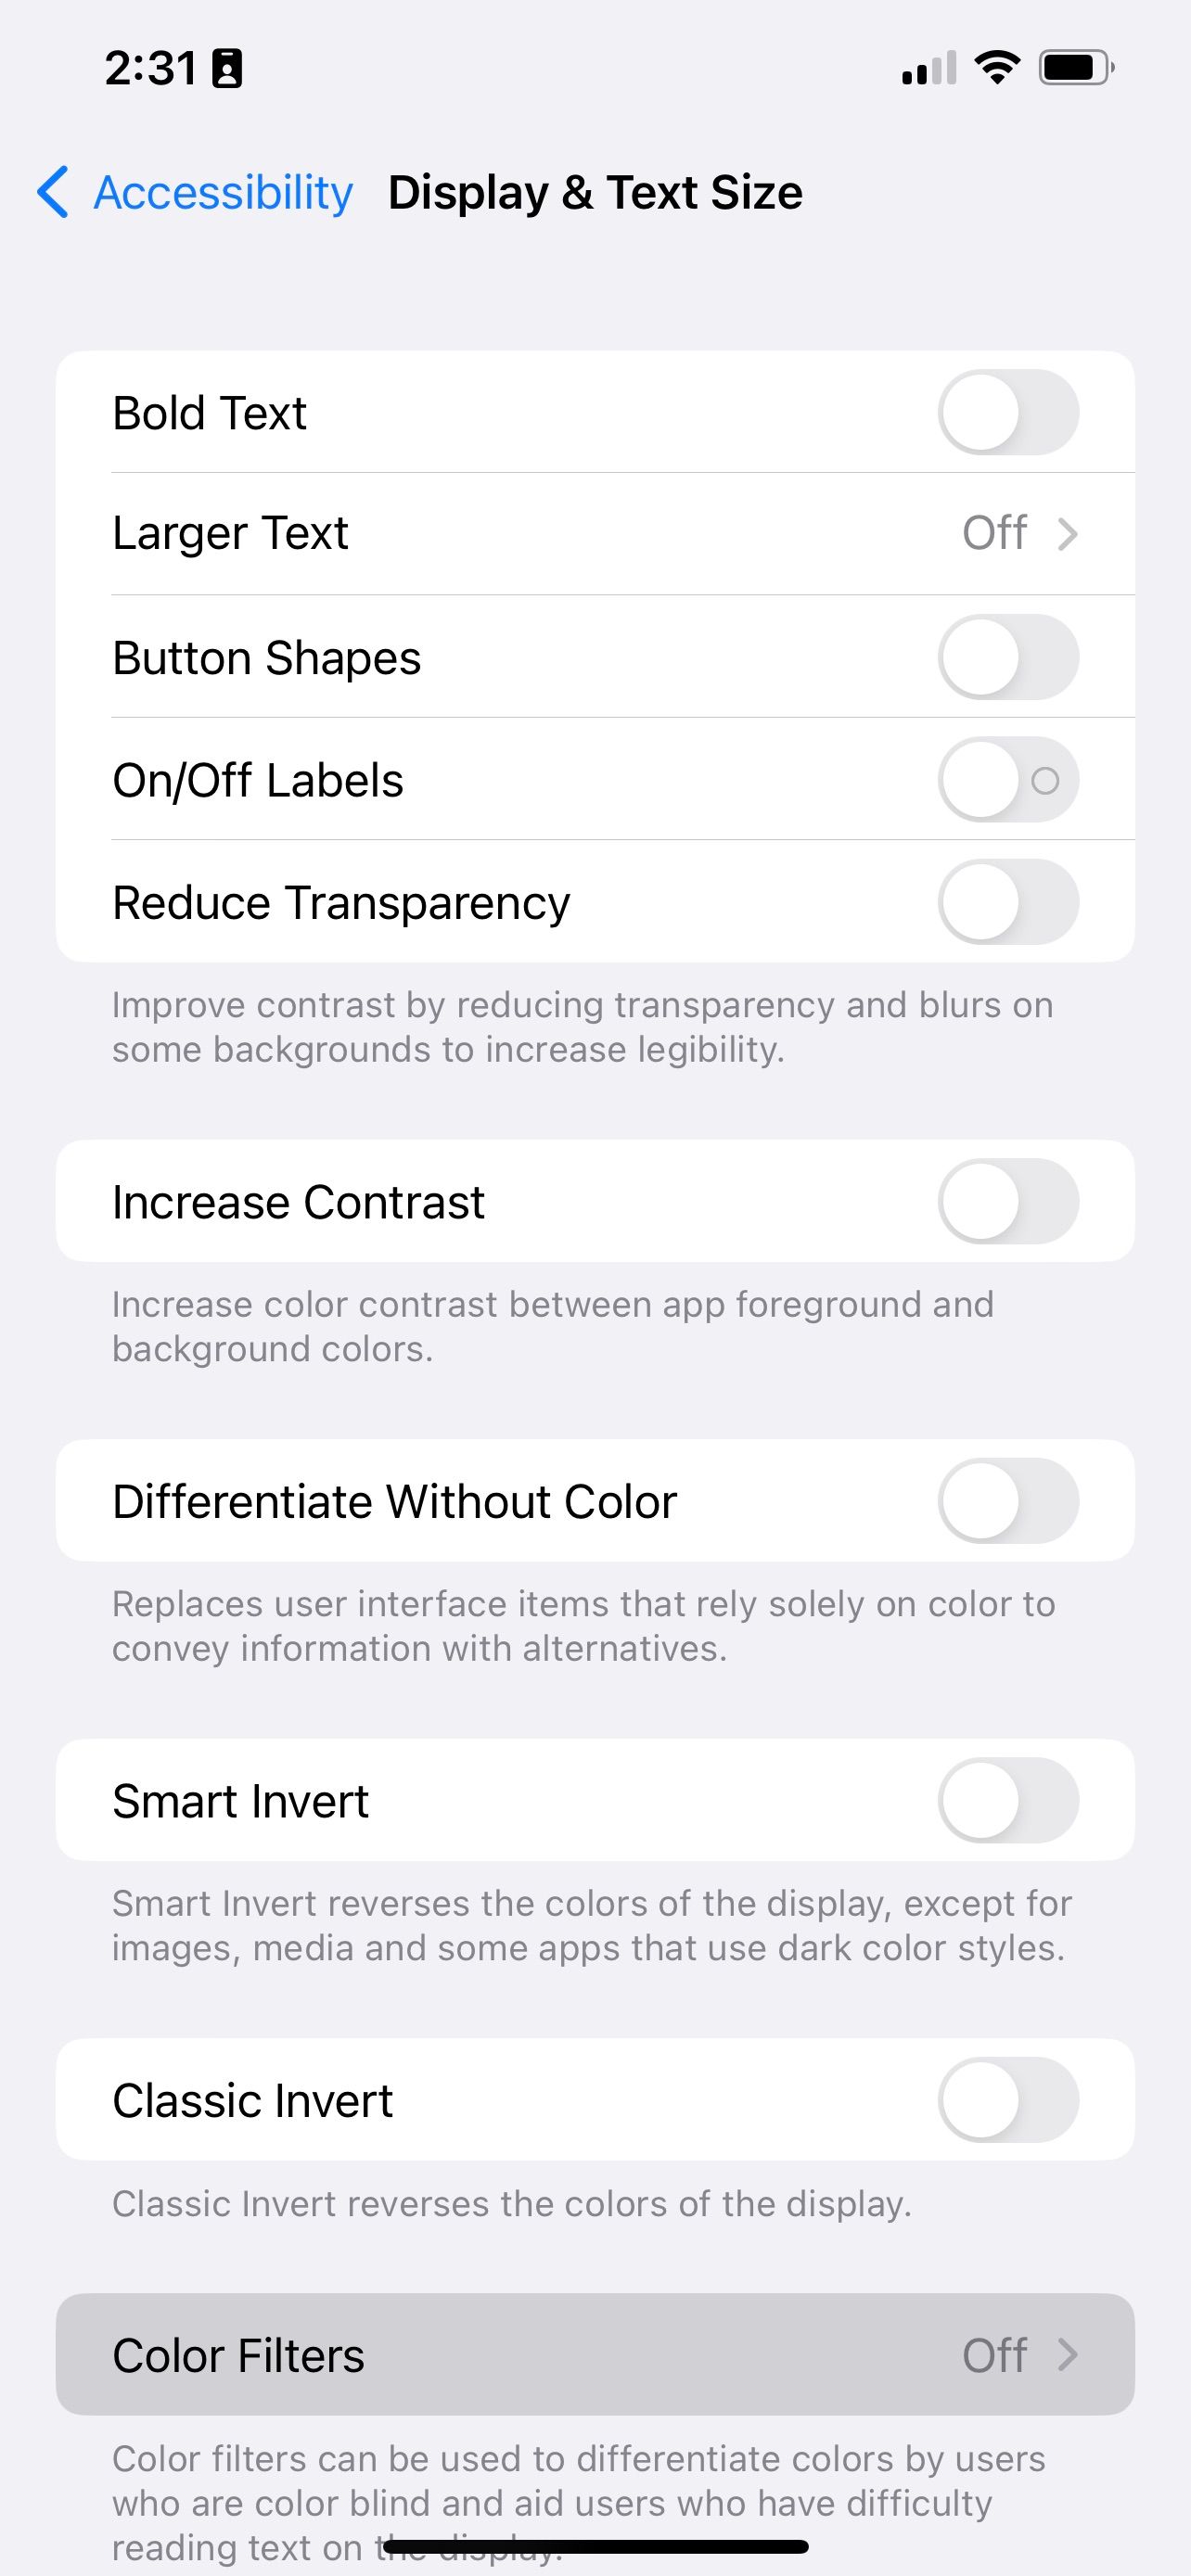 Location of color filters setting in iPhone accessibility